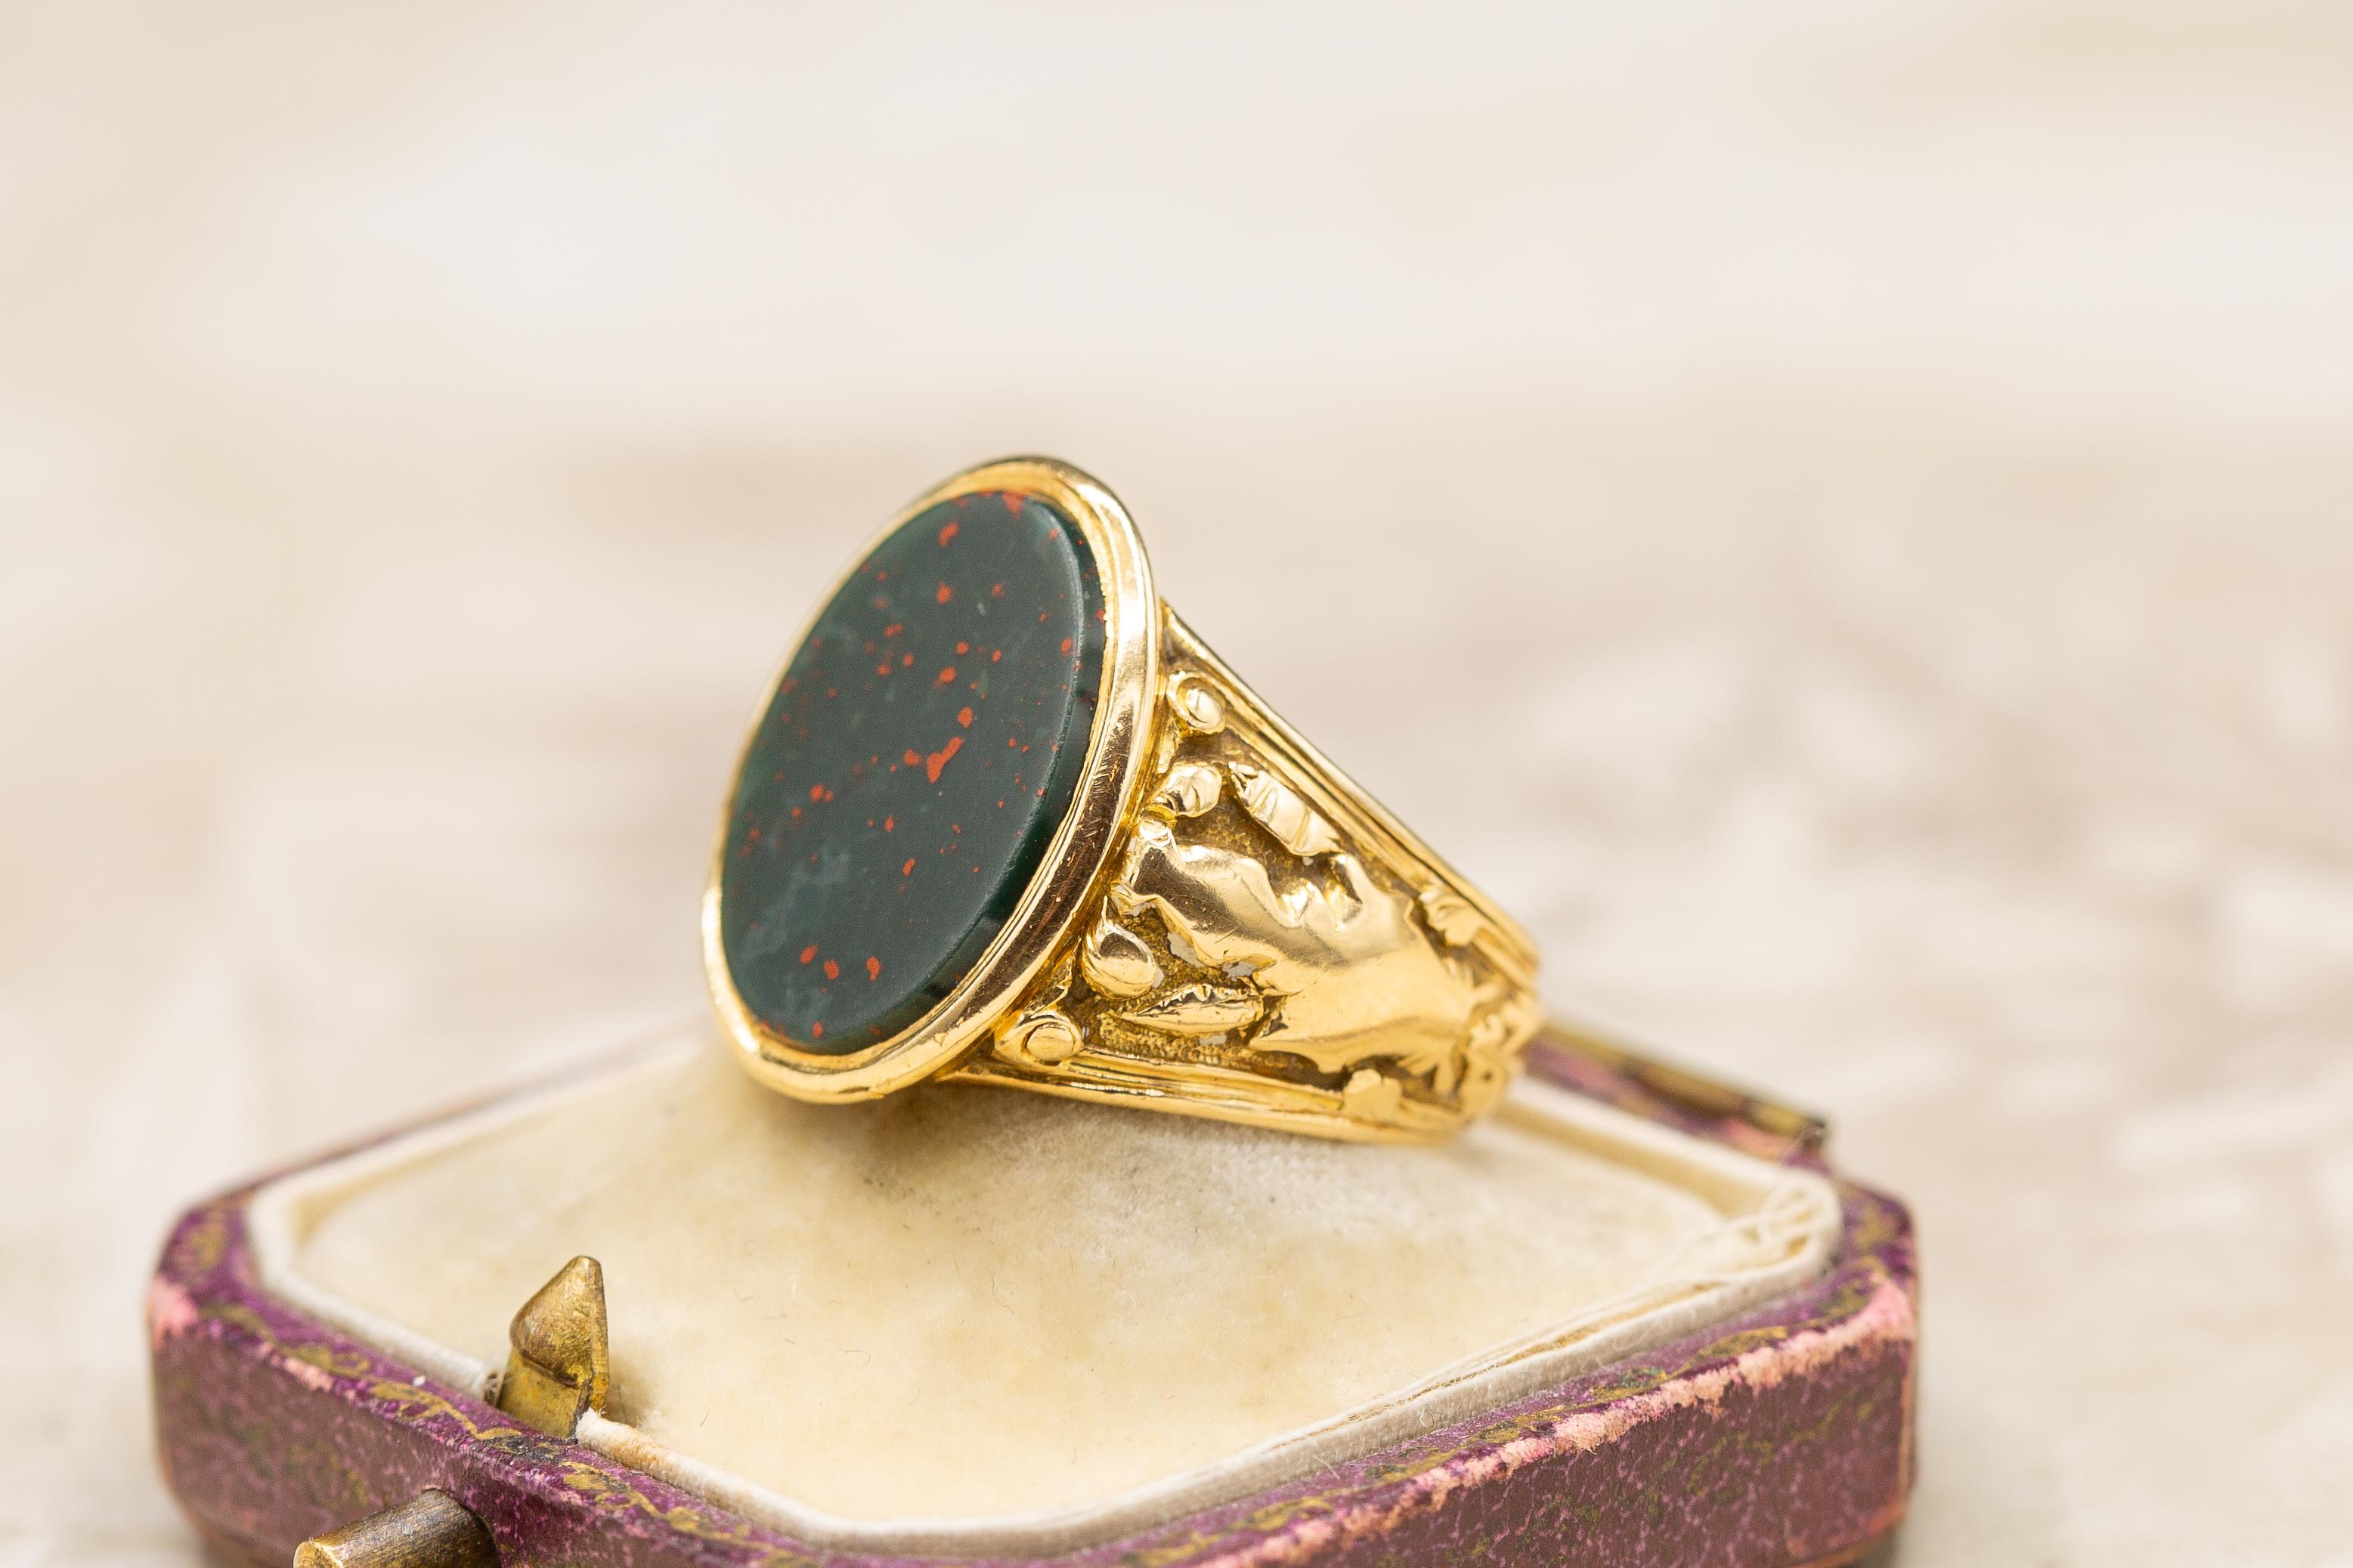 Antique Victorian Heavy 18K Gold Bloodstone Signet Ring Mens Coat of Arms c.1890 For Sale 6